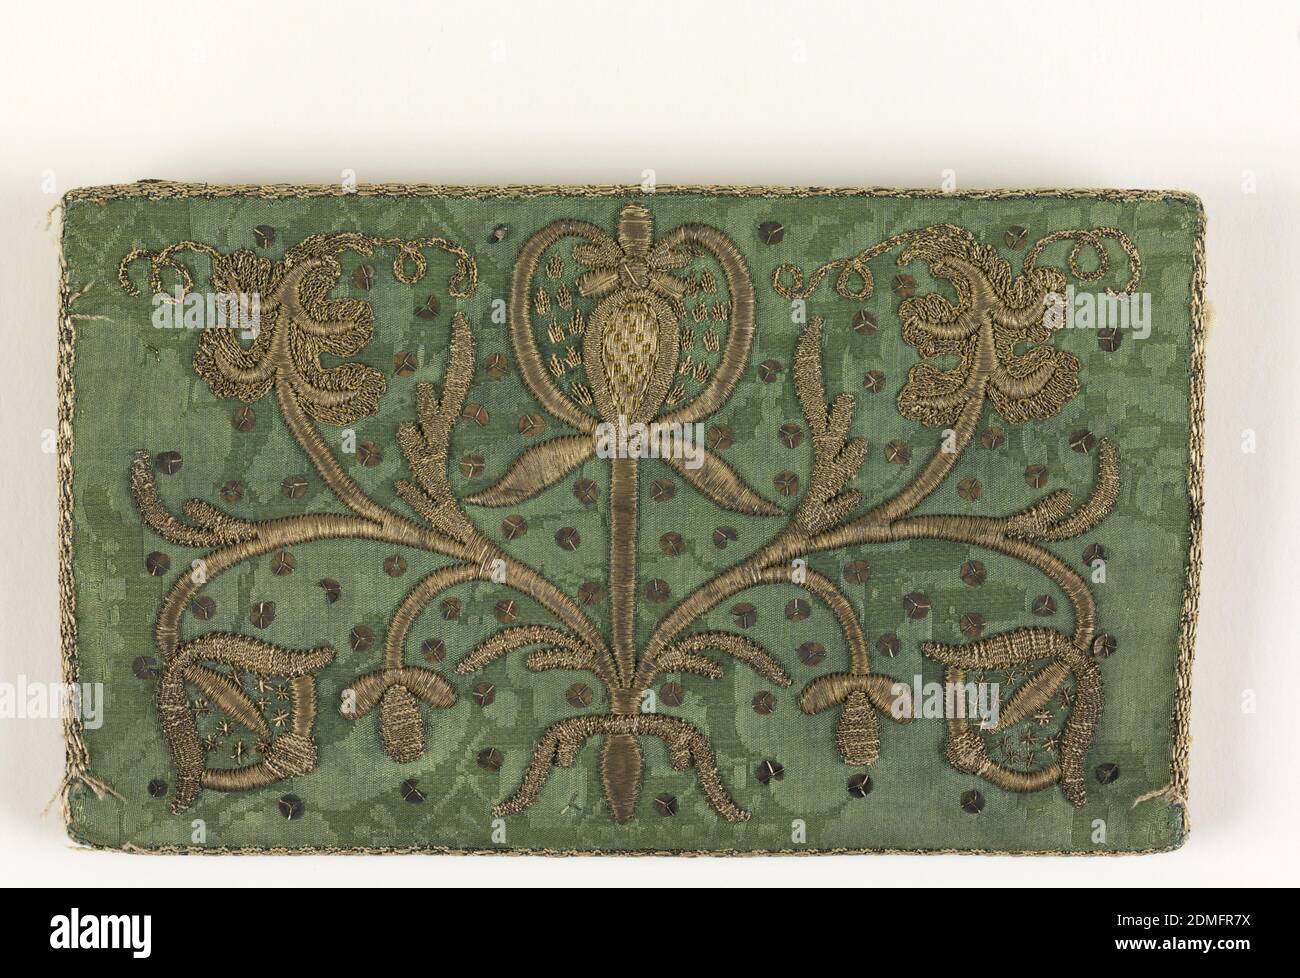 Letter case, Medium: metal-wrapped silk threads, flat gilt wire and silver spangles on silk foundation Technique: embroidered in padded couching stitches on damask foundation, Letter case of green silk damask with conventionalized design in metallic thread; lining of white silk., Italy or Spain, 17th century, costume & accessories, Letter case Stock Photo